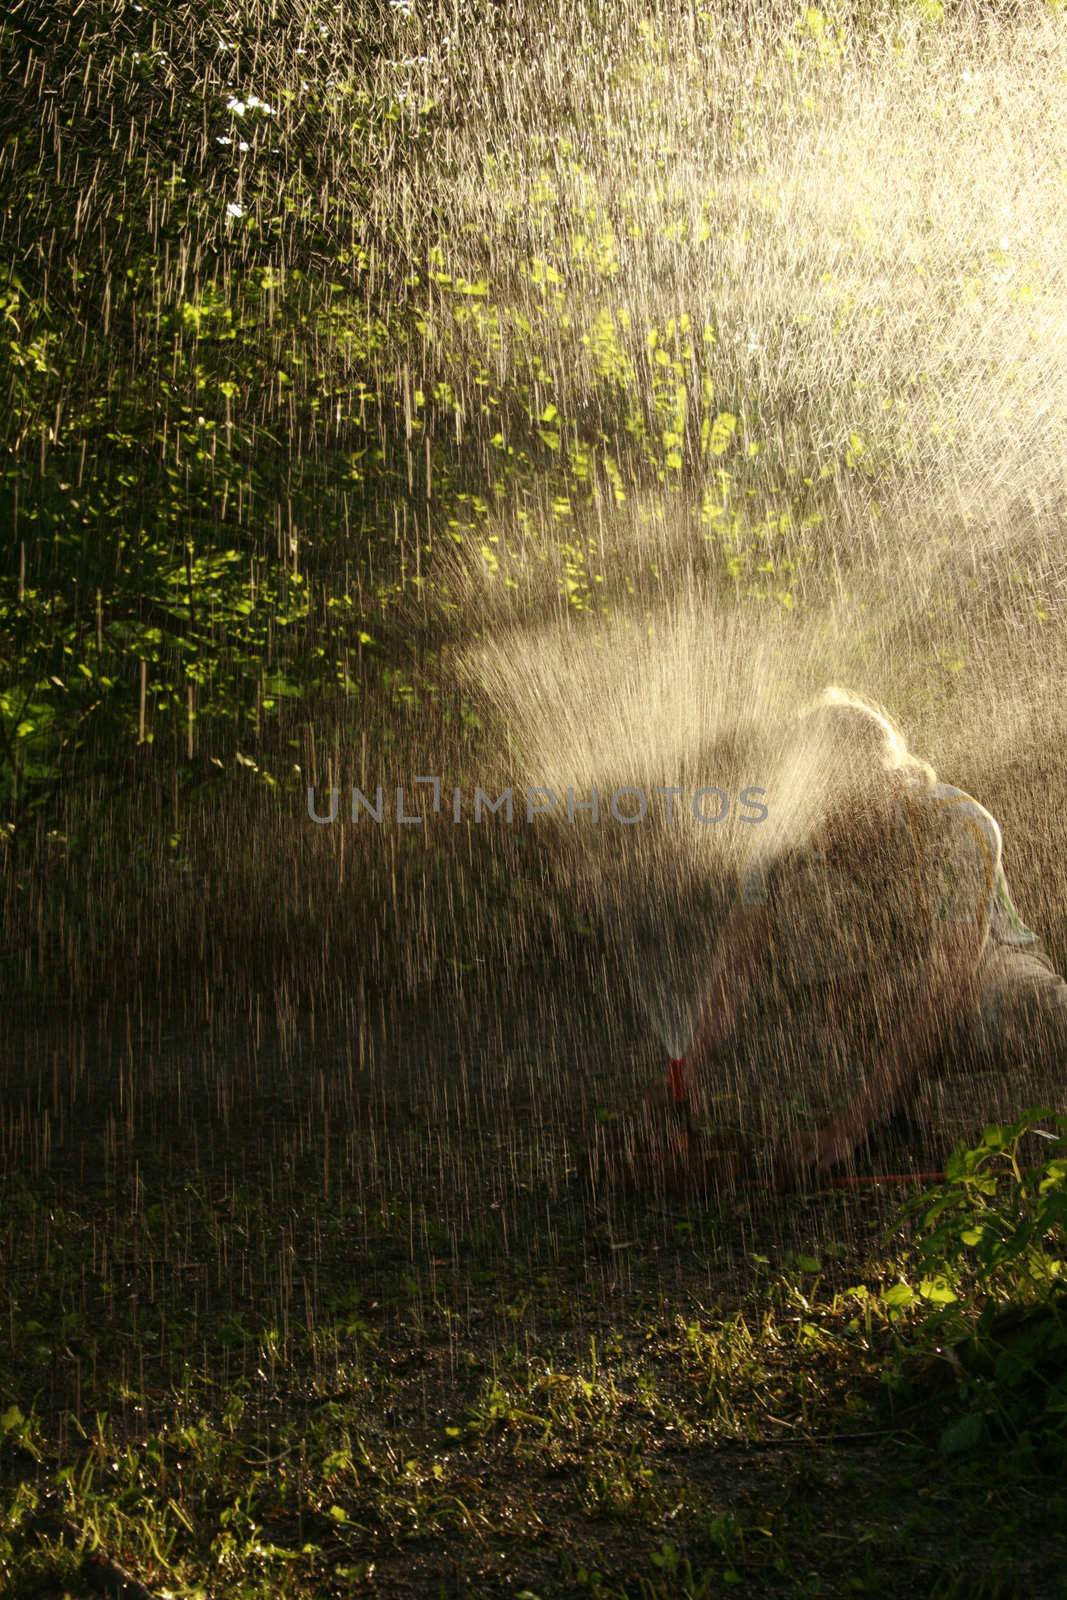 a man adjusting the water hose in his garden in a dry period.